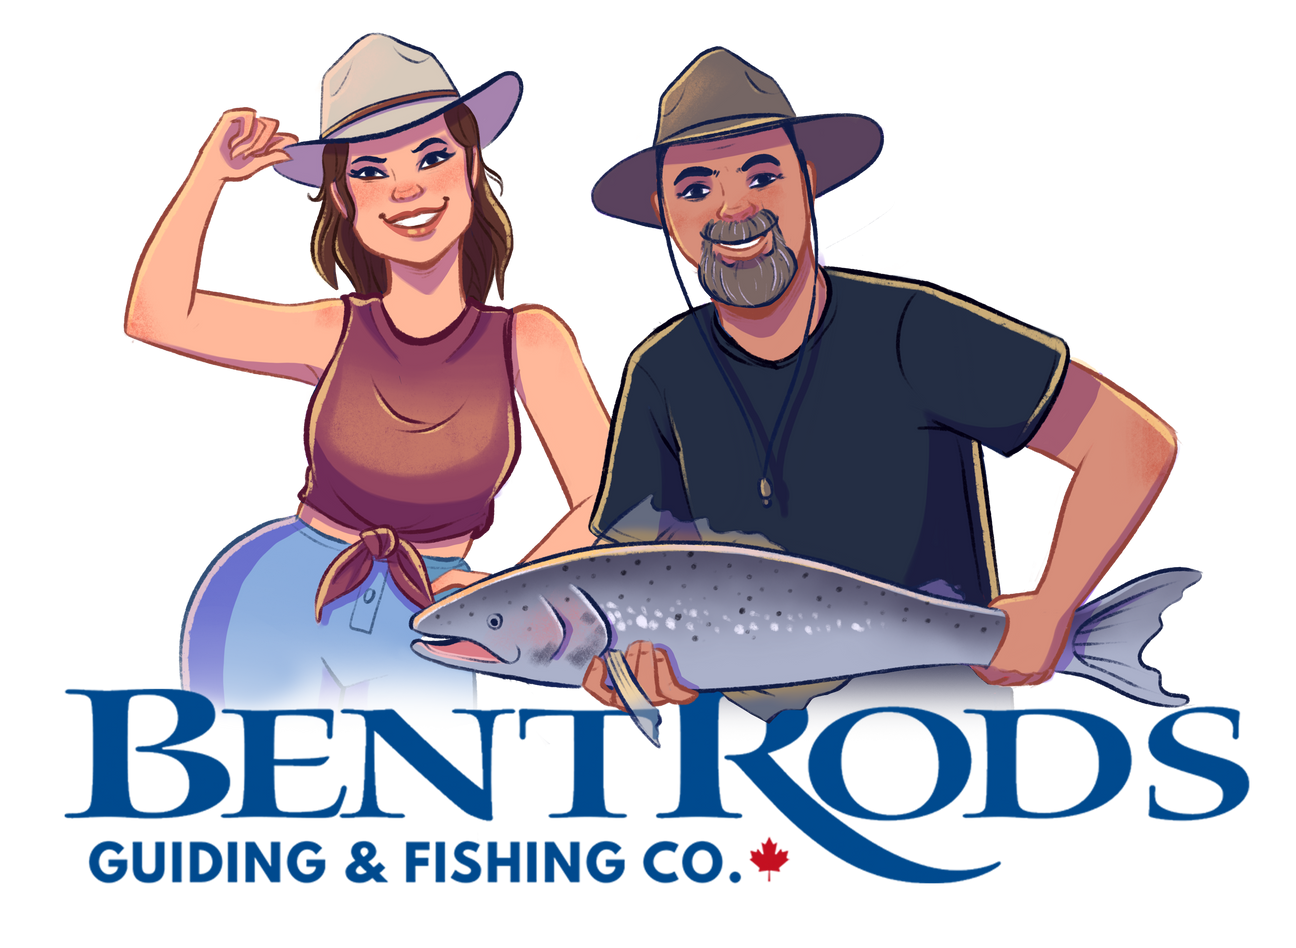 rod fishing guides, rod fishing guides Suppliers and Manufacturers